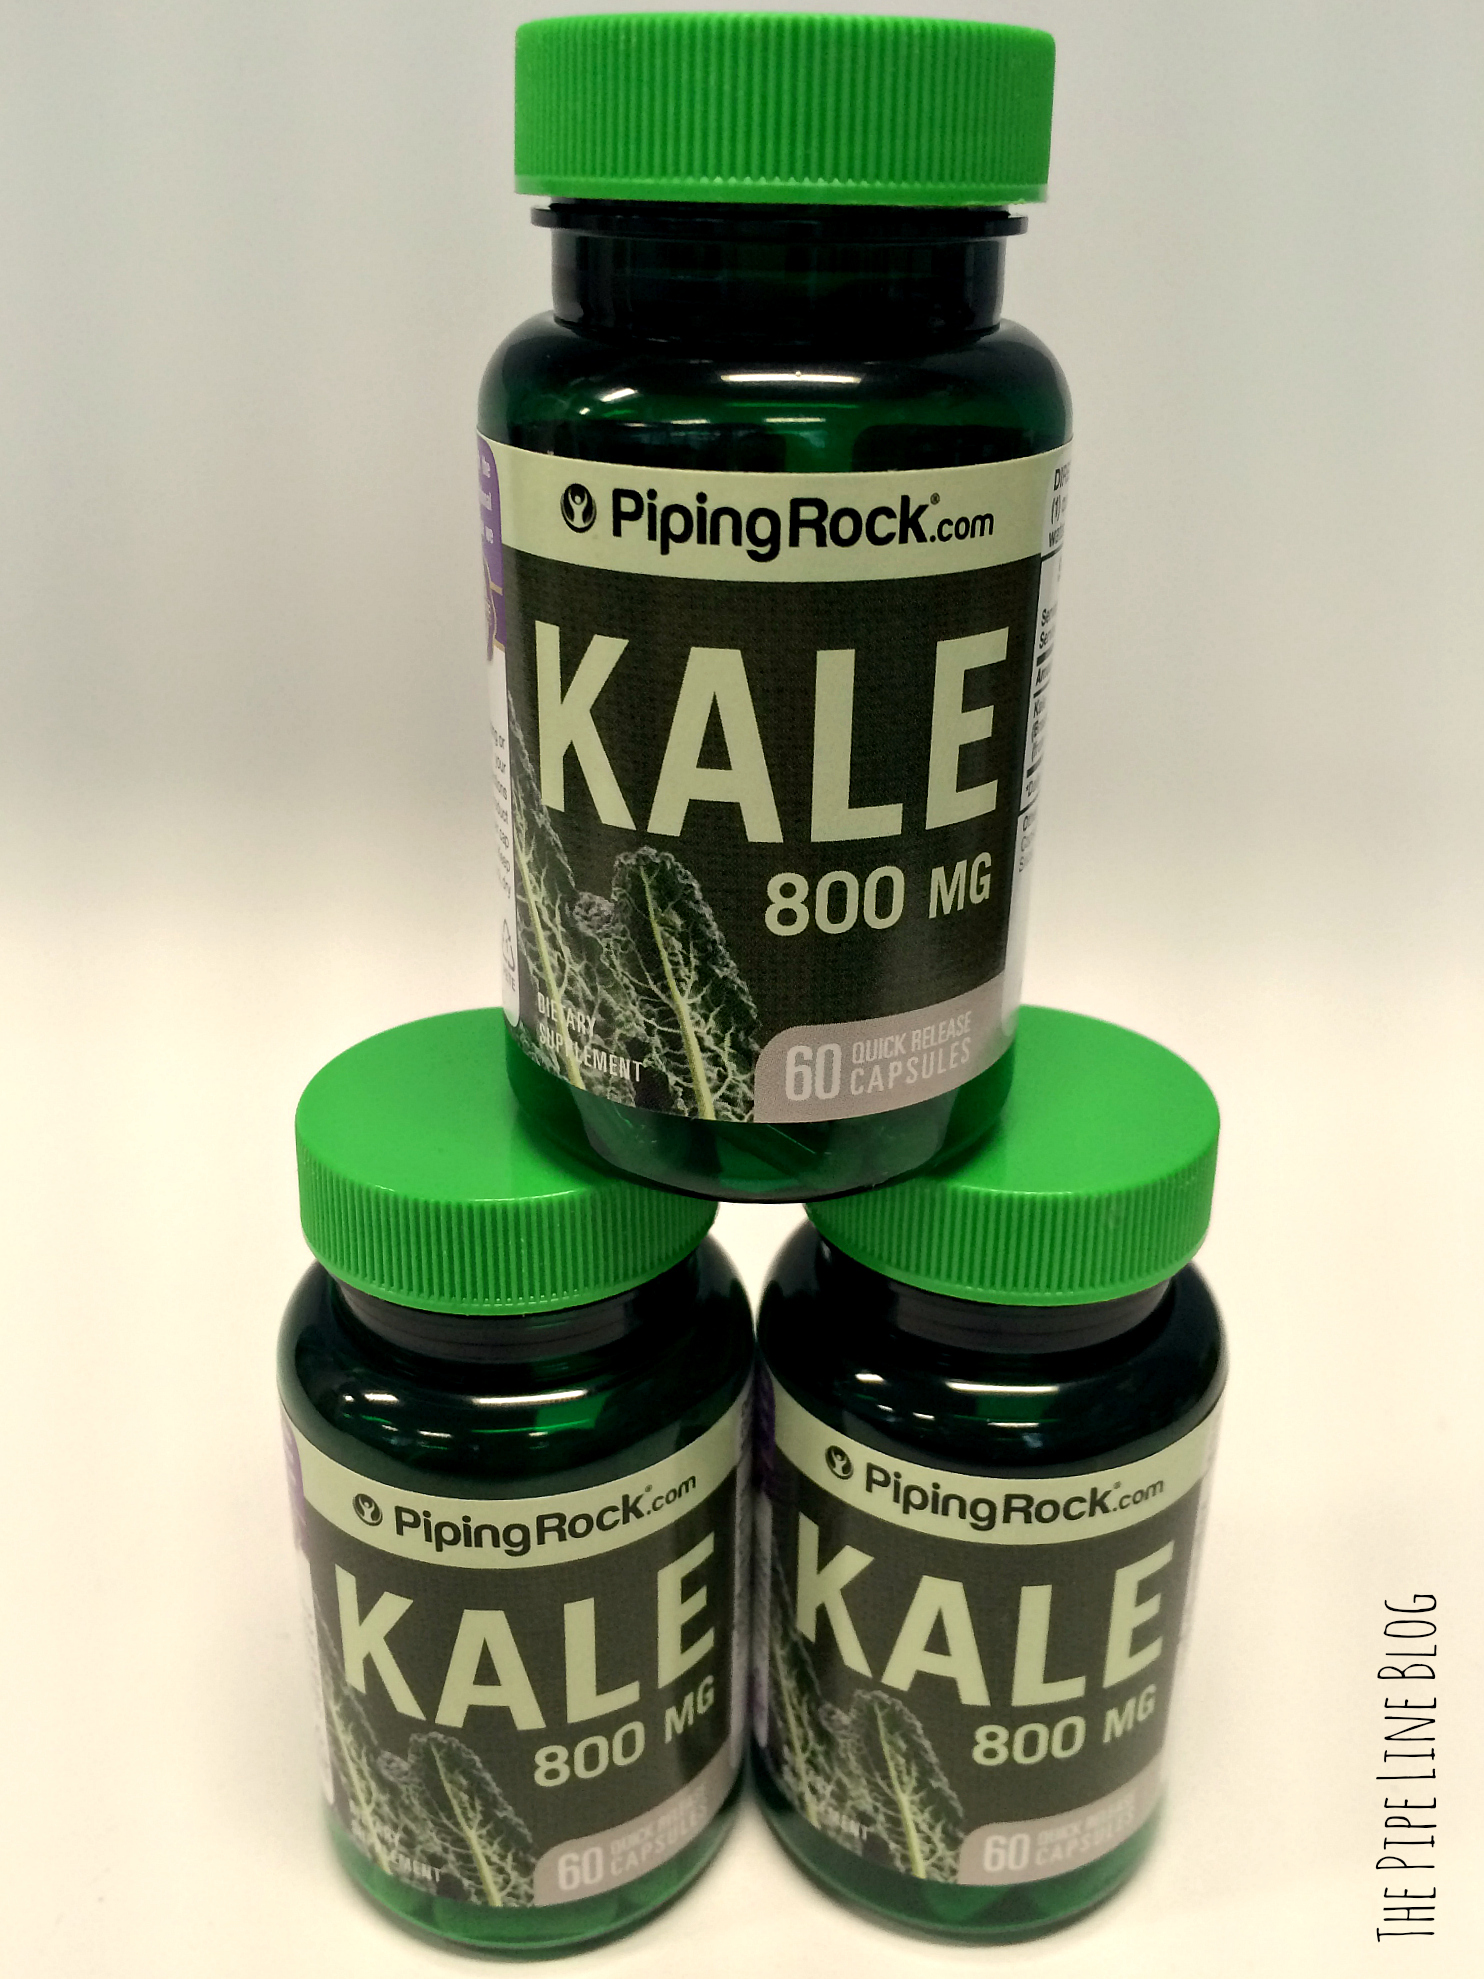 Piping Rock Kale Supplements